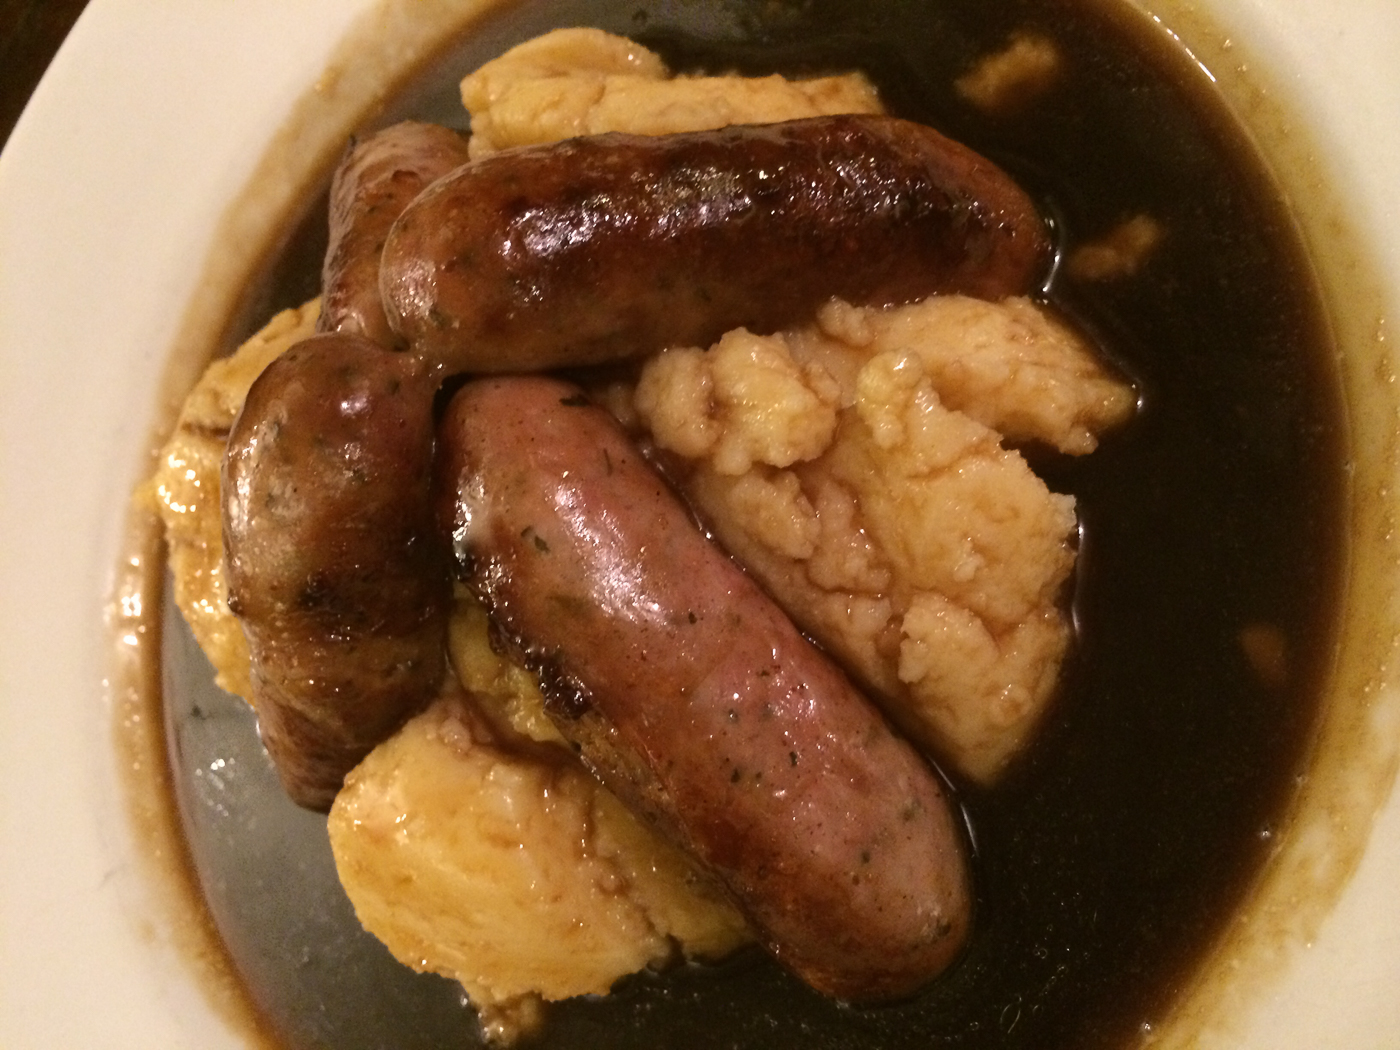 The Bangers and the Mash